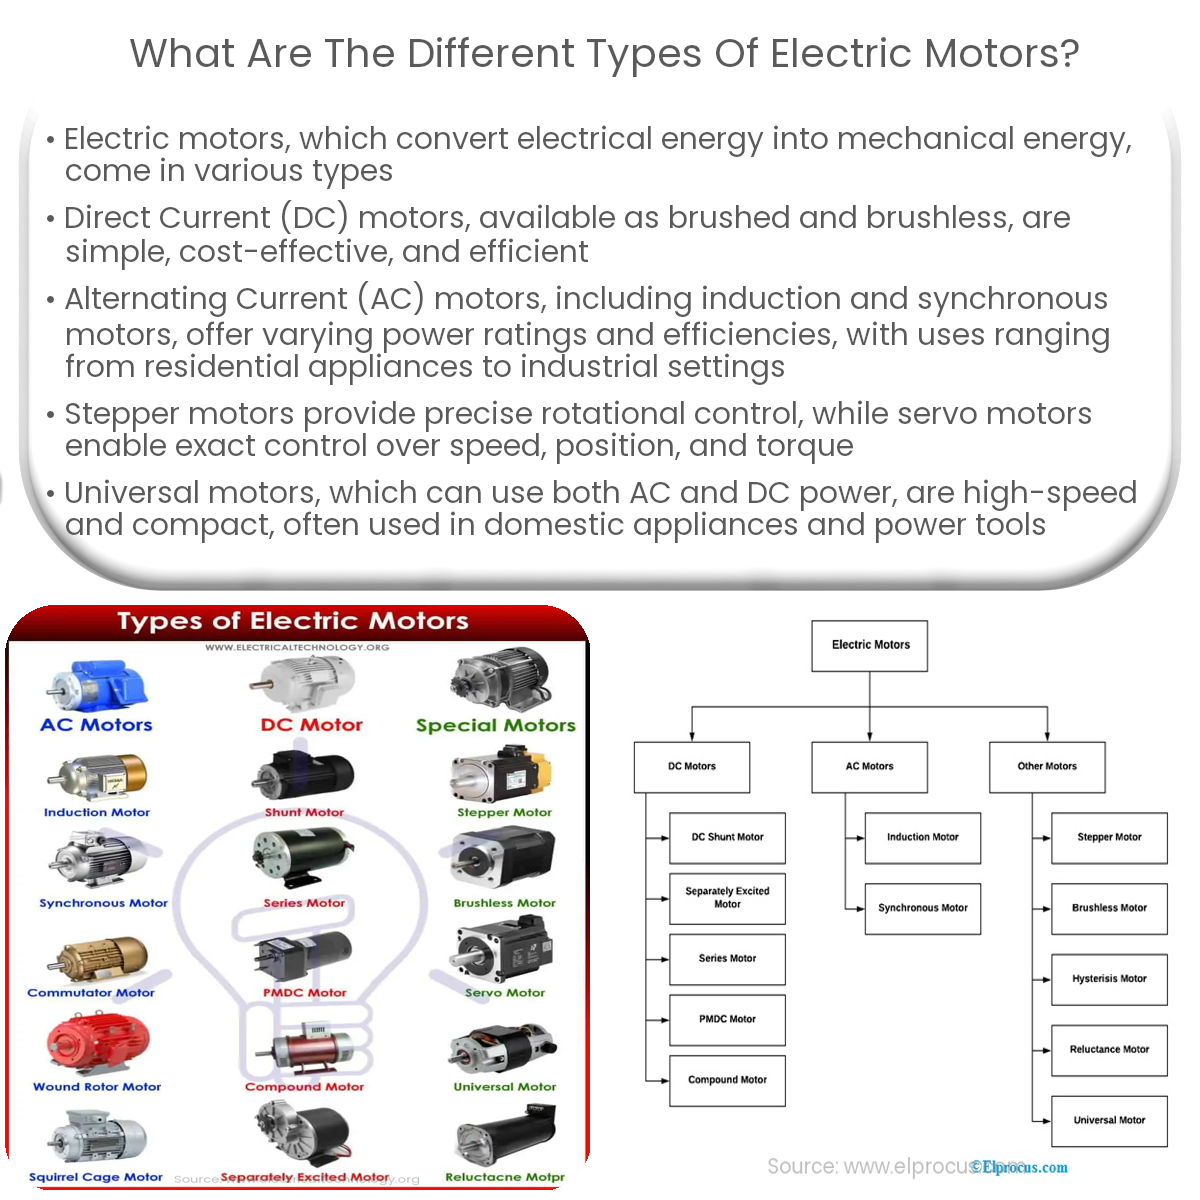 https://www.electricity-magnetism.org/wp-content/uploads/2023/06/what-are-the-different-types-of-electric-motors.png